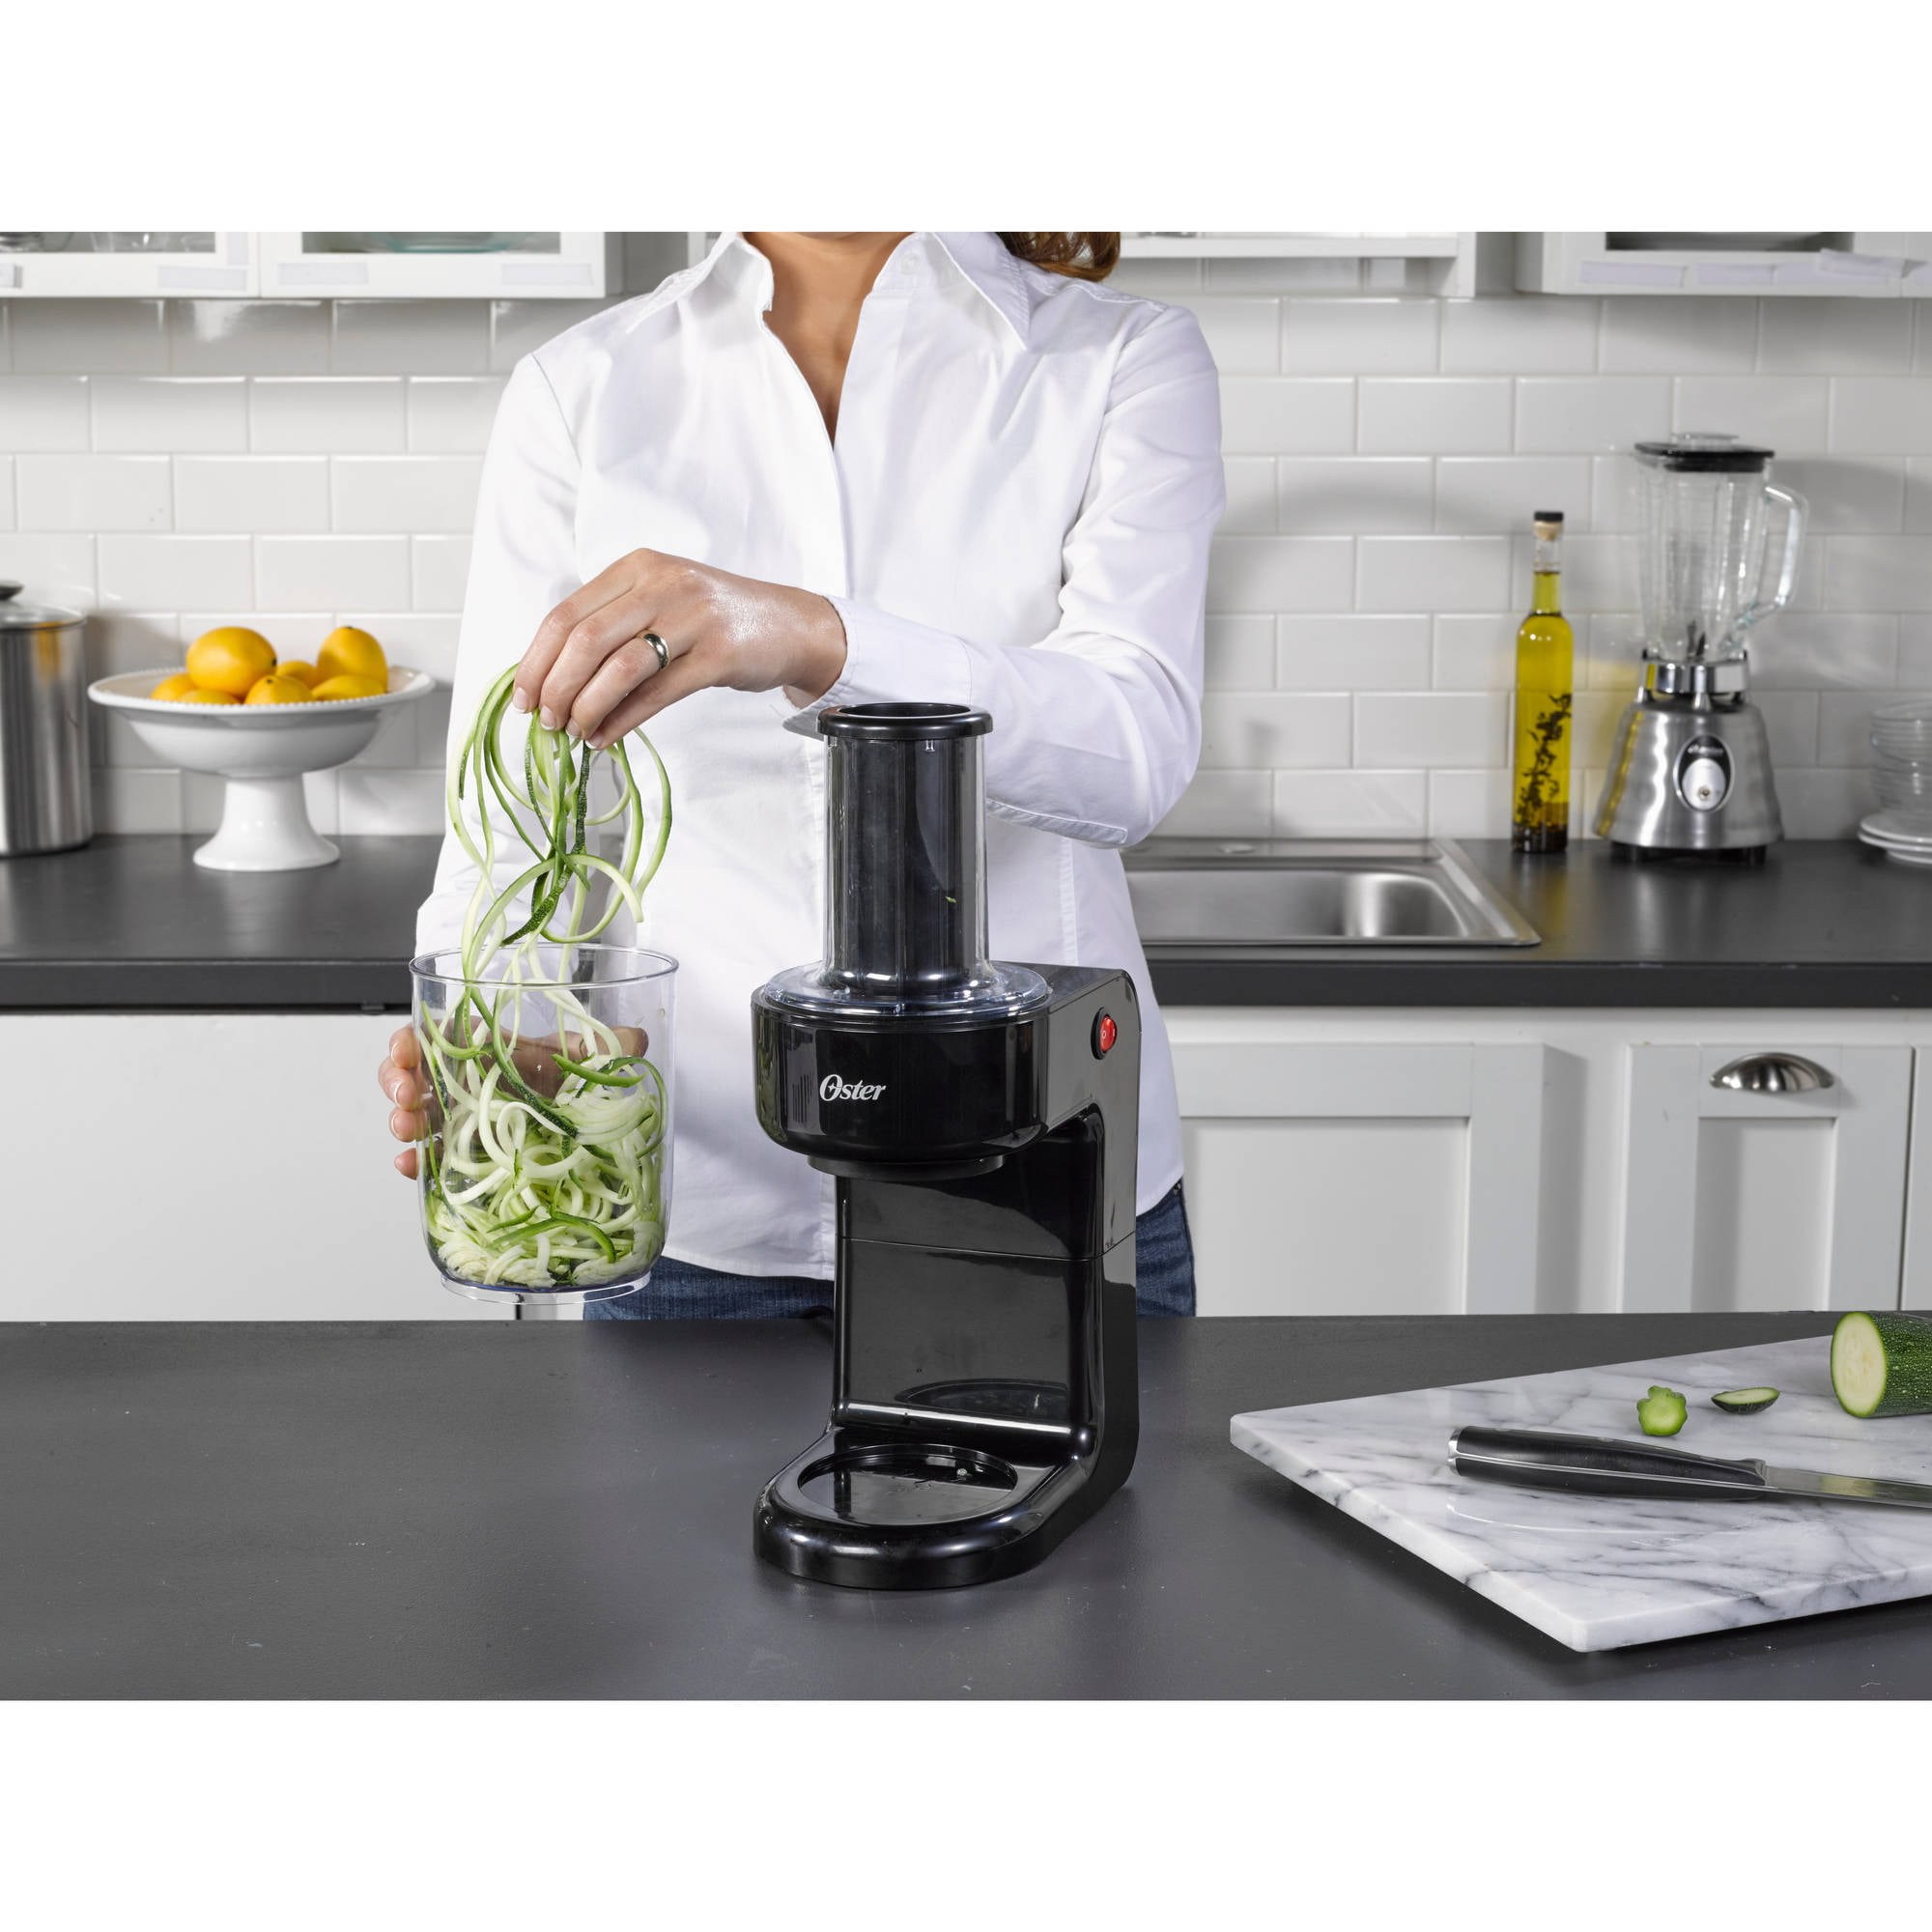 New Black Oster Electric SPIRALIZER Easy to Use.  Spiralize Veggies and more